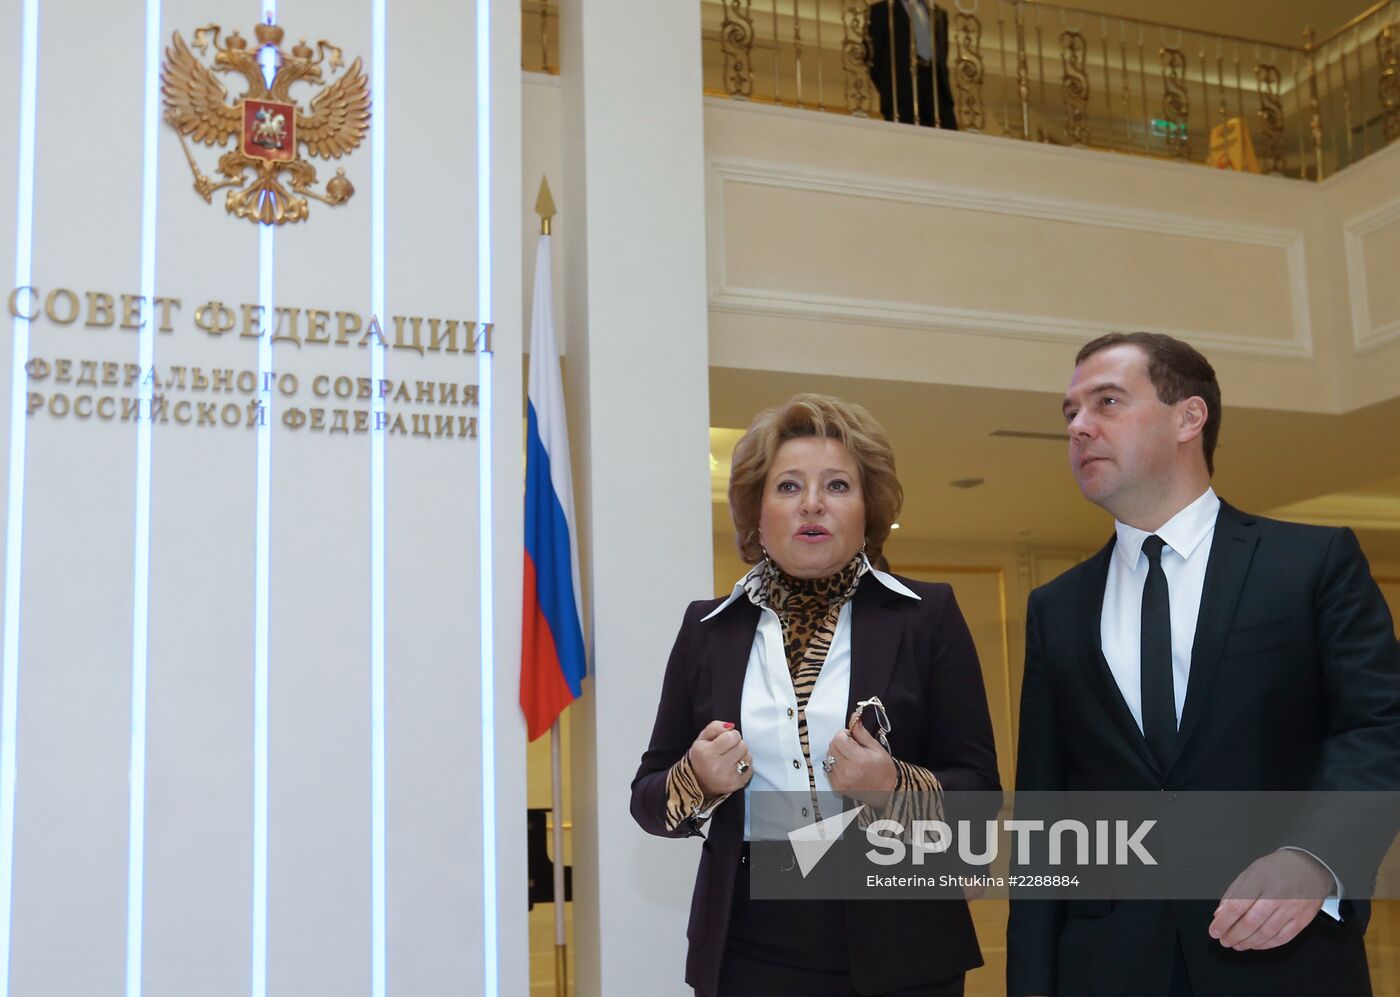 Dmitry Medvedev meets with Federation Council's administration